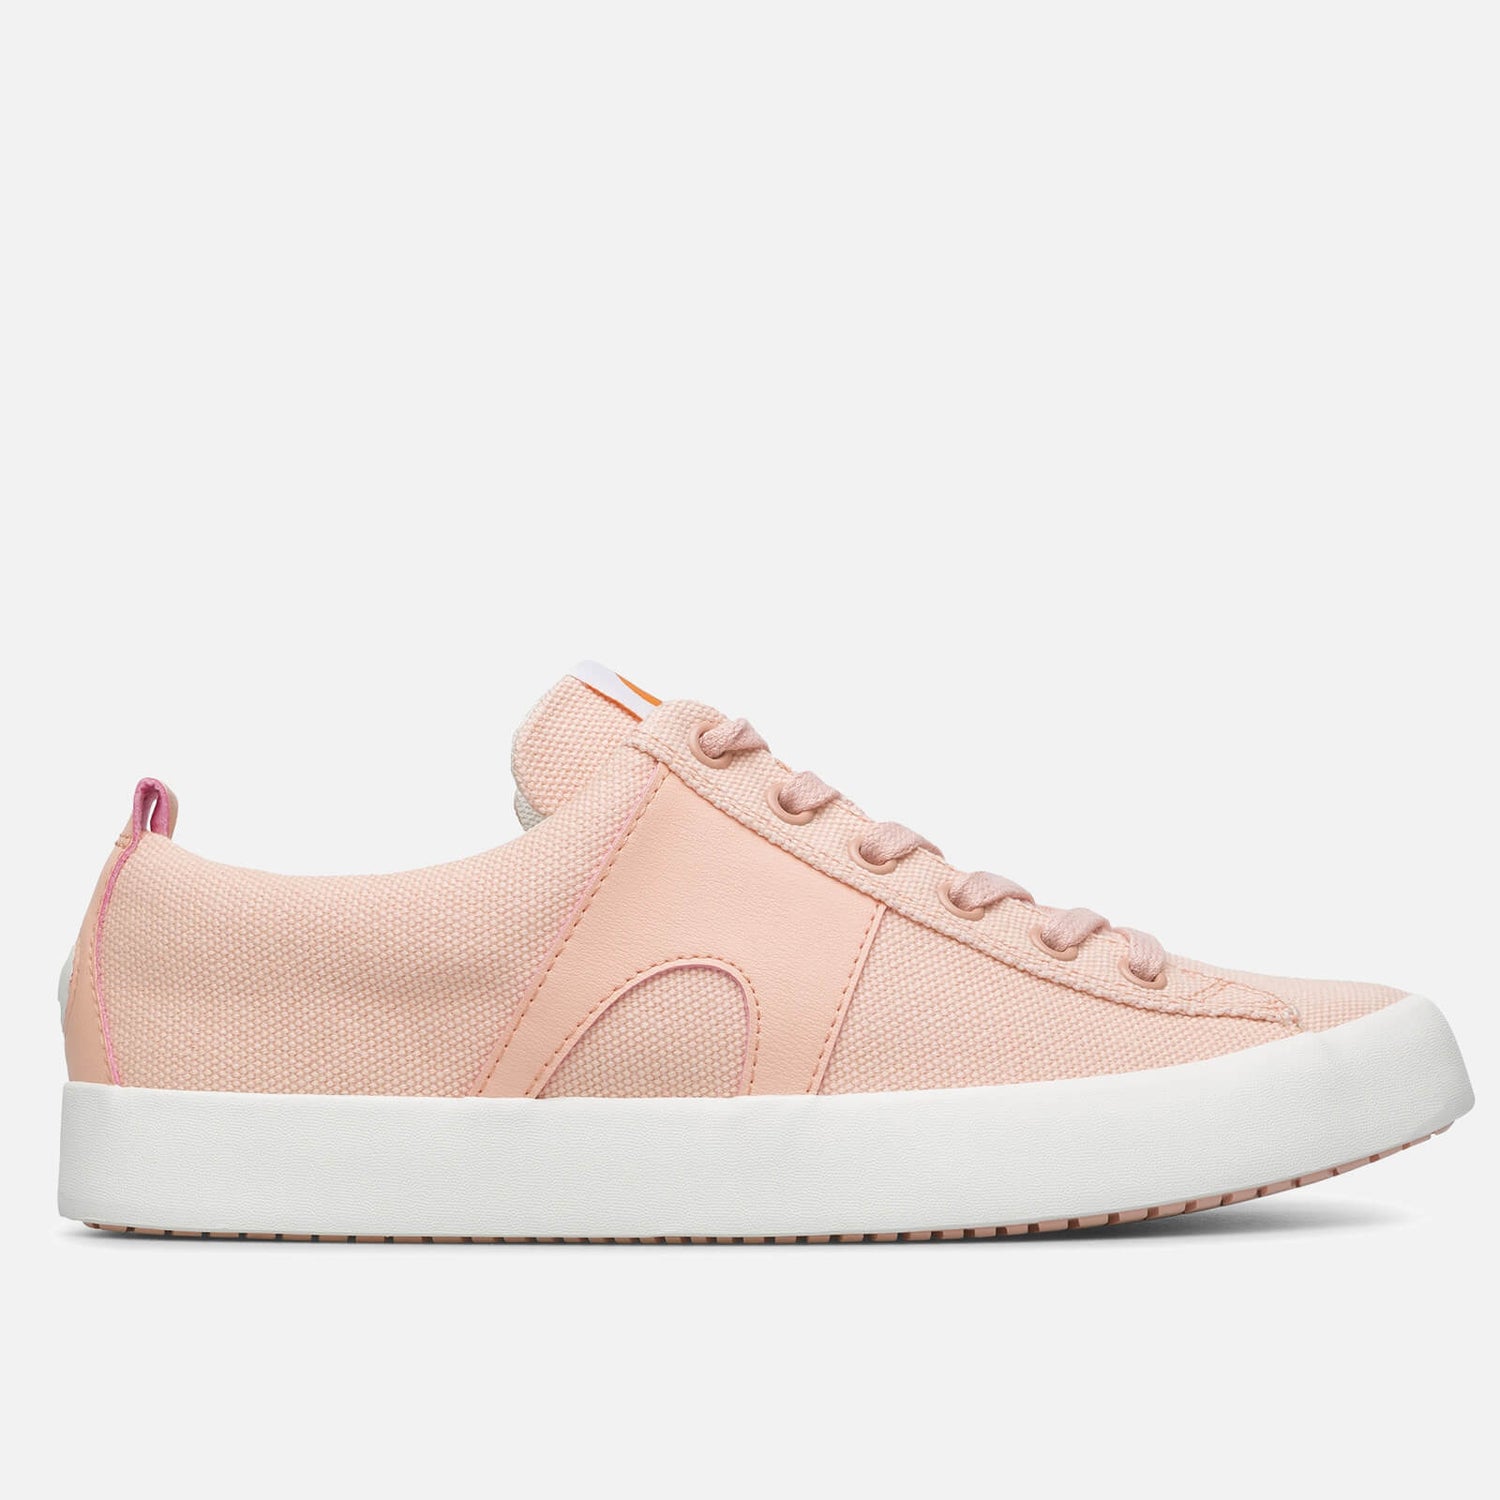 Camper Women's Canvas Low Top Trainers - Light Pastel Pink